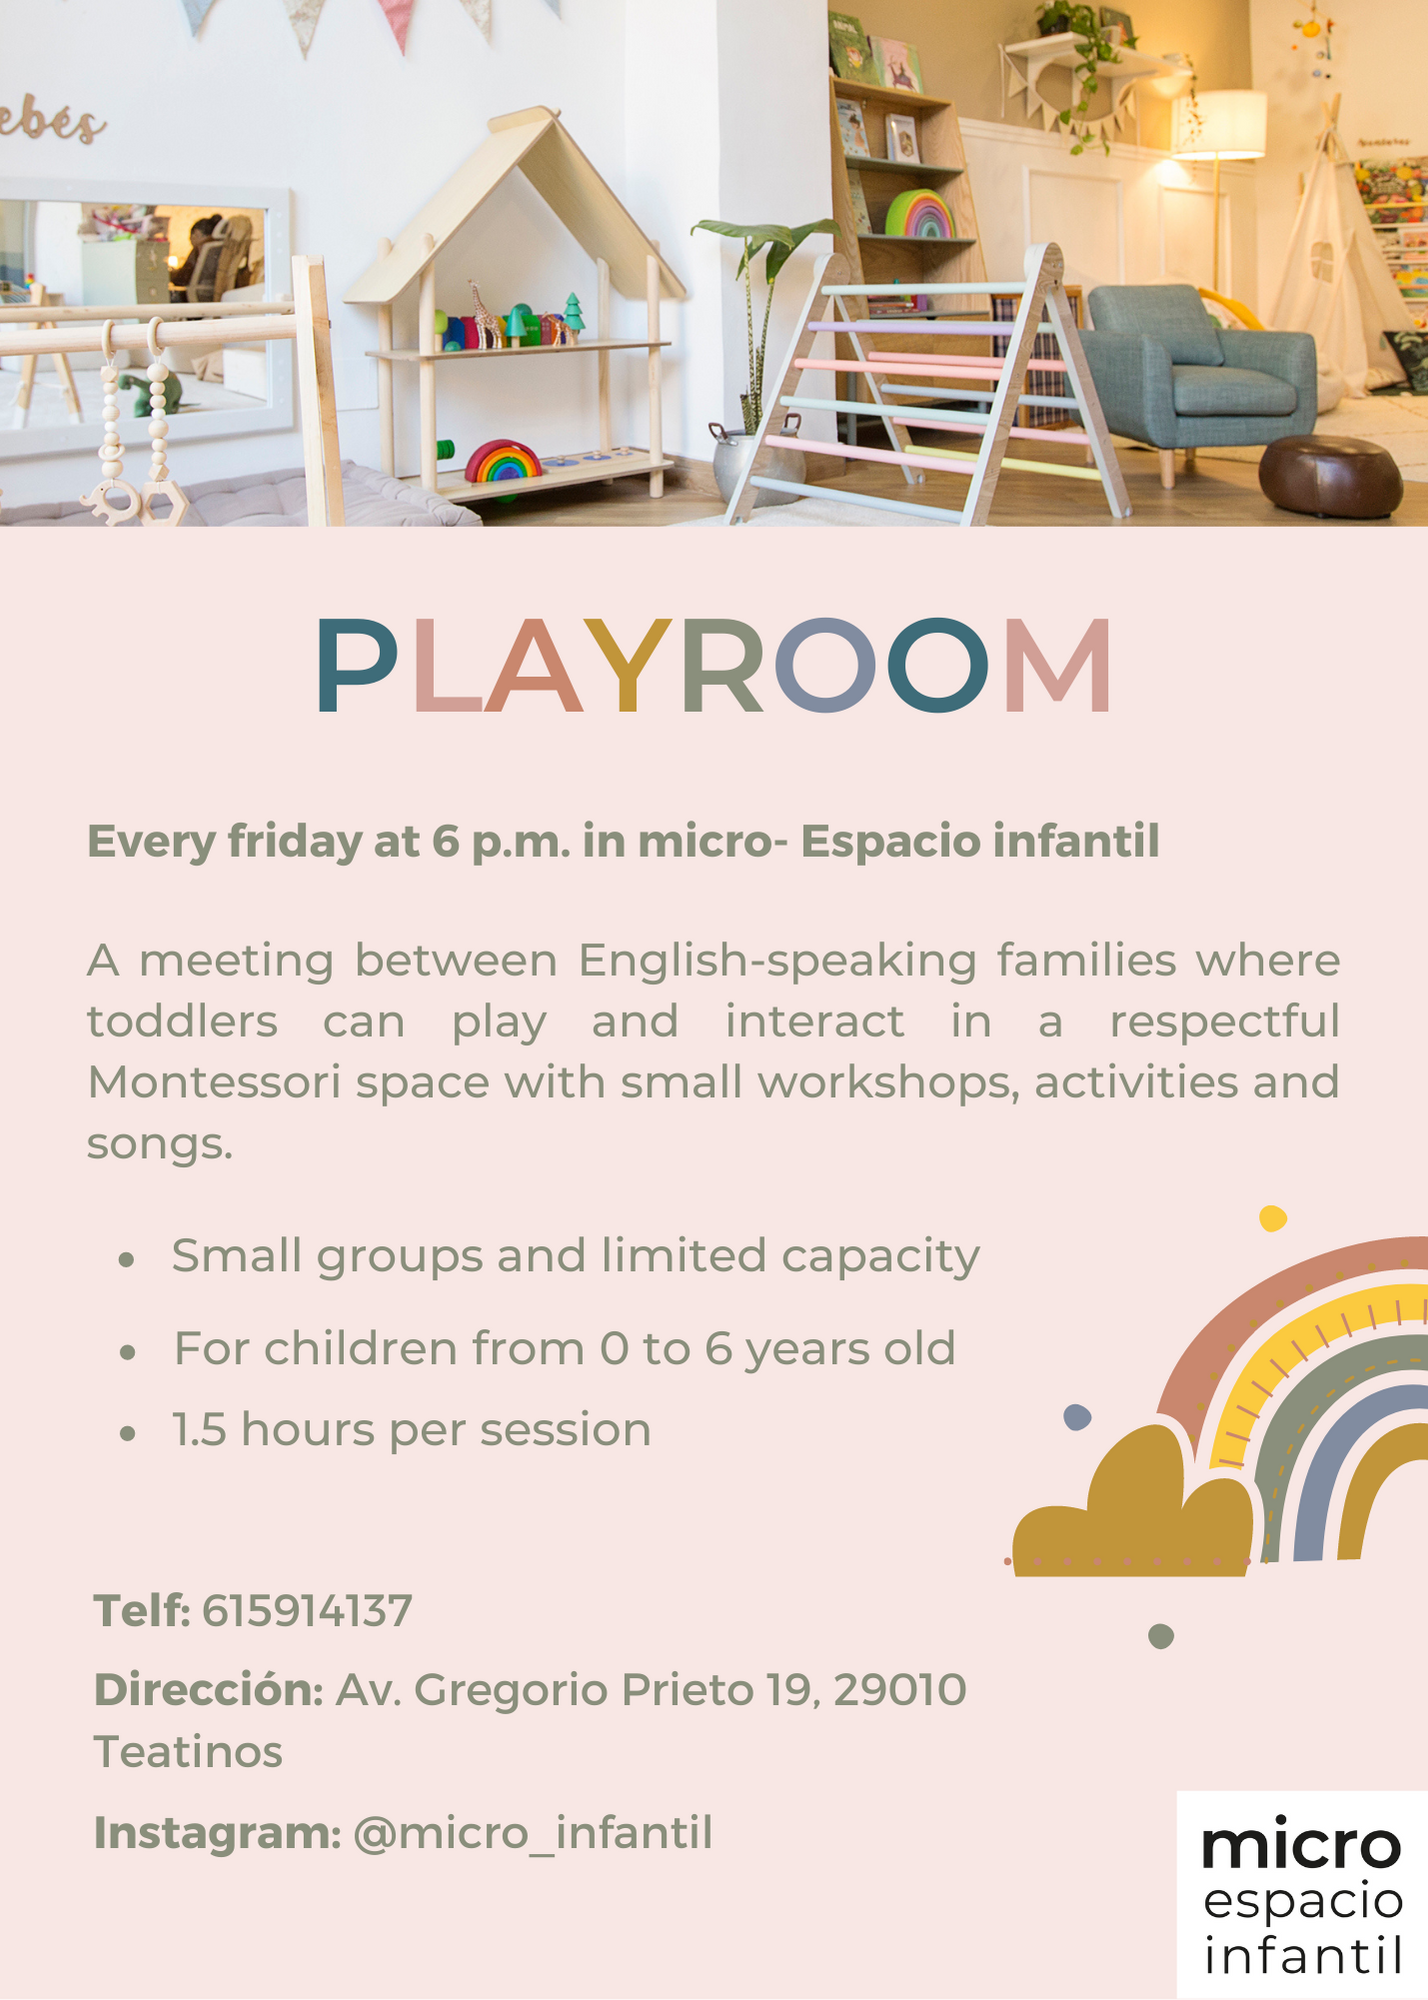 Promotional poster for the playroom